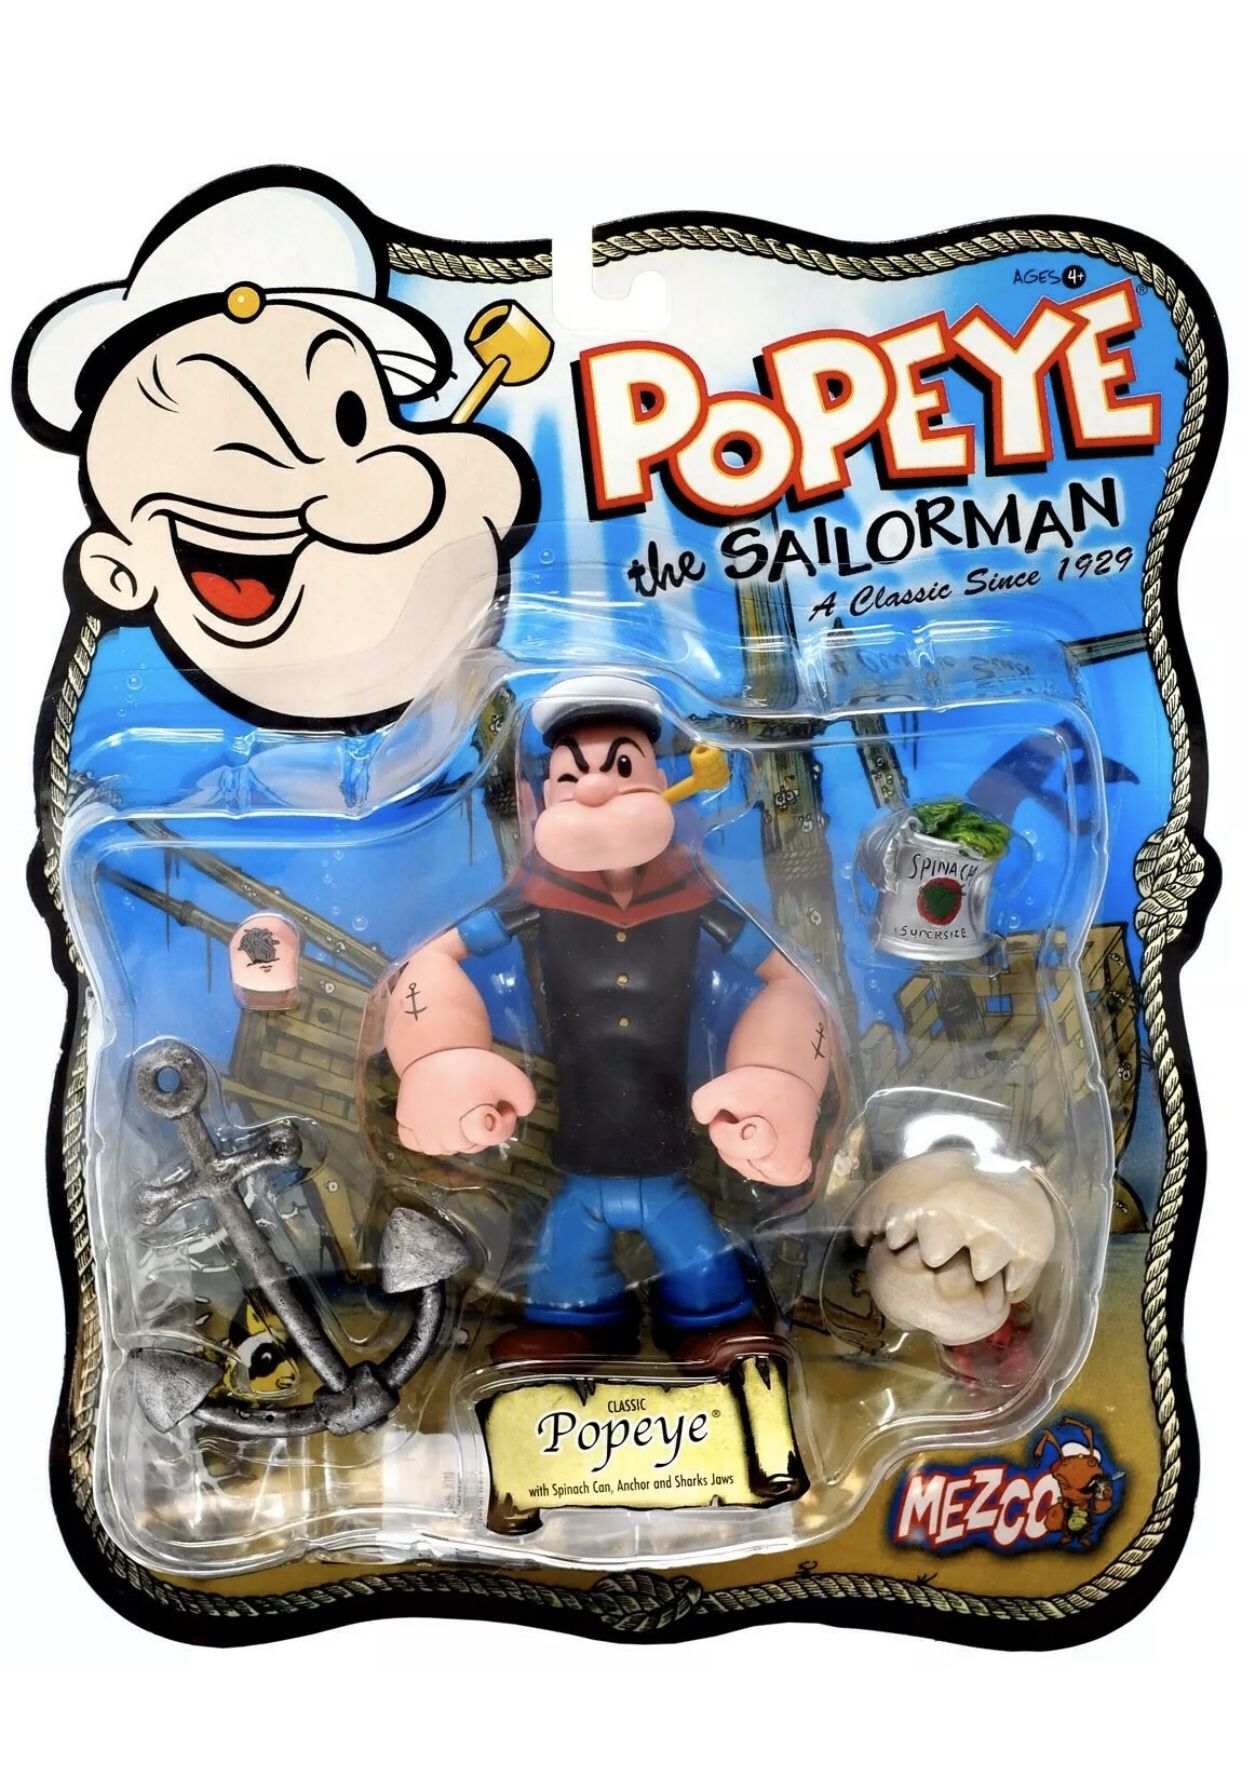 Popeye the Sailor Man Classic Popeye Action Figure